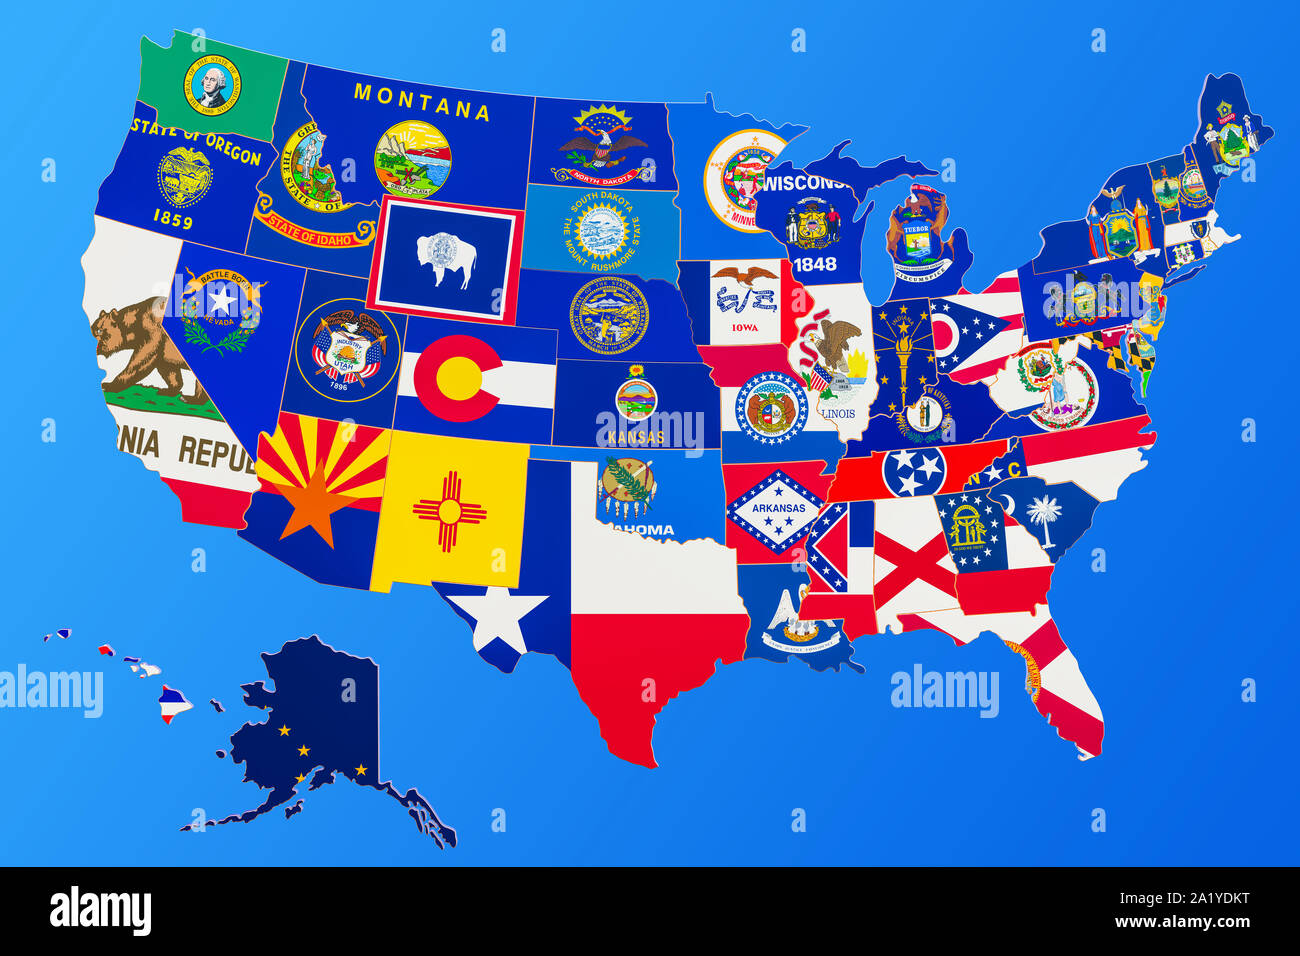 United States Of America Map With State Flags 3d Rendering Isolated On